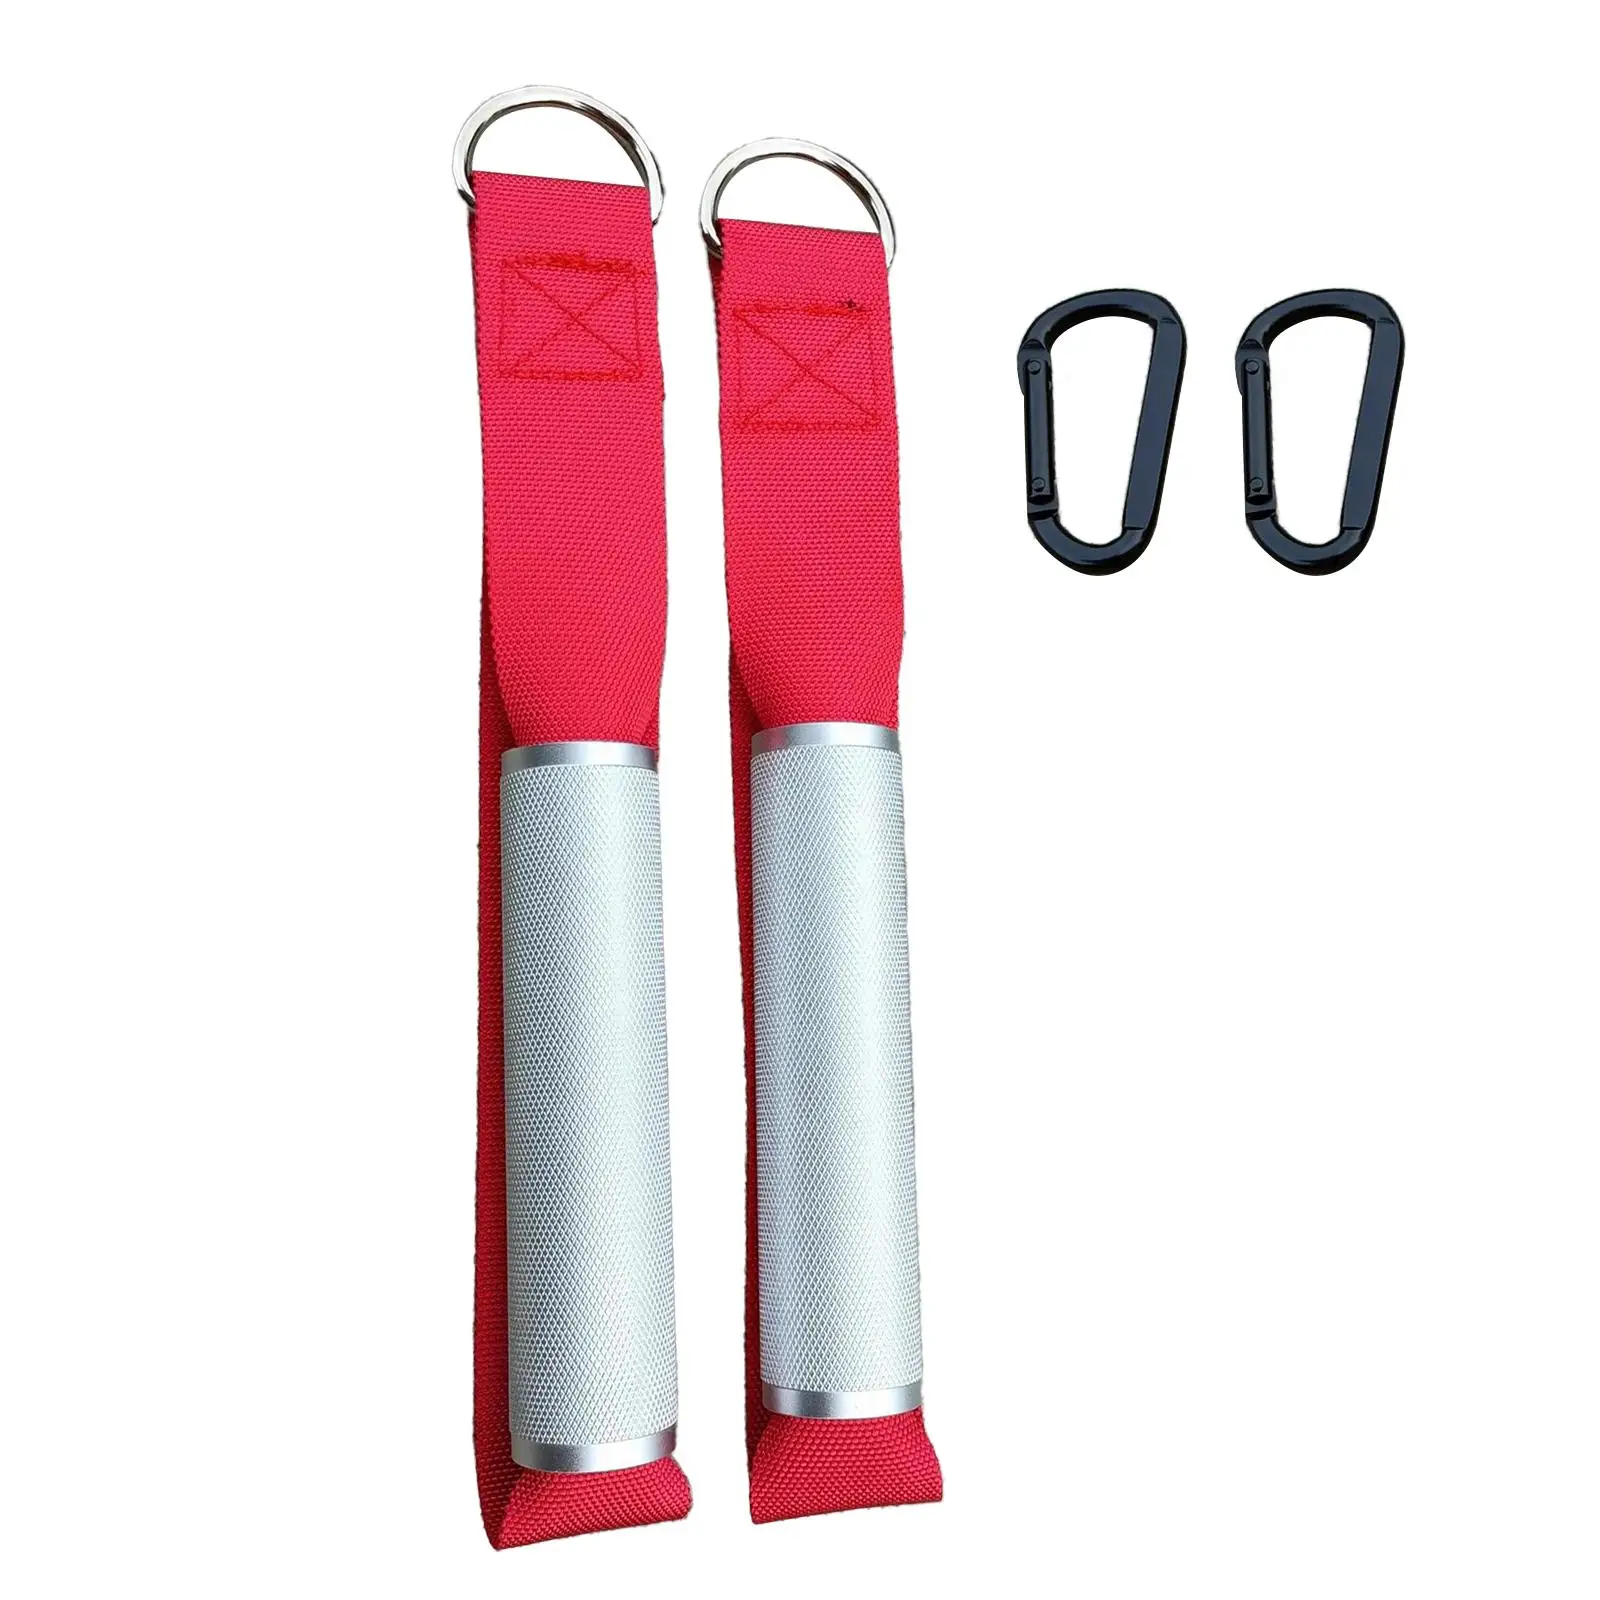 2x Gym Handles Gymnastics Hanging LAT Row Bar Resistance Exercise Accs Exercise Equipment for Yoga Pilates Strength Trainer